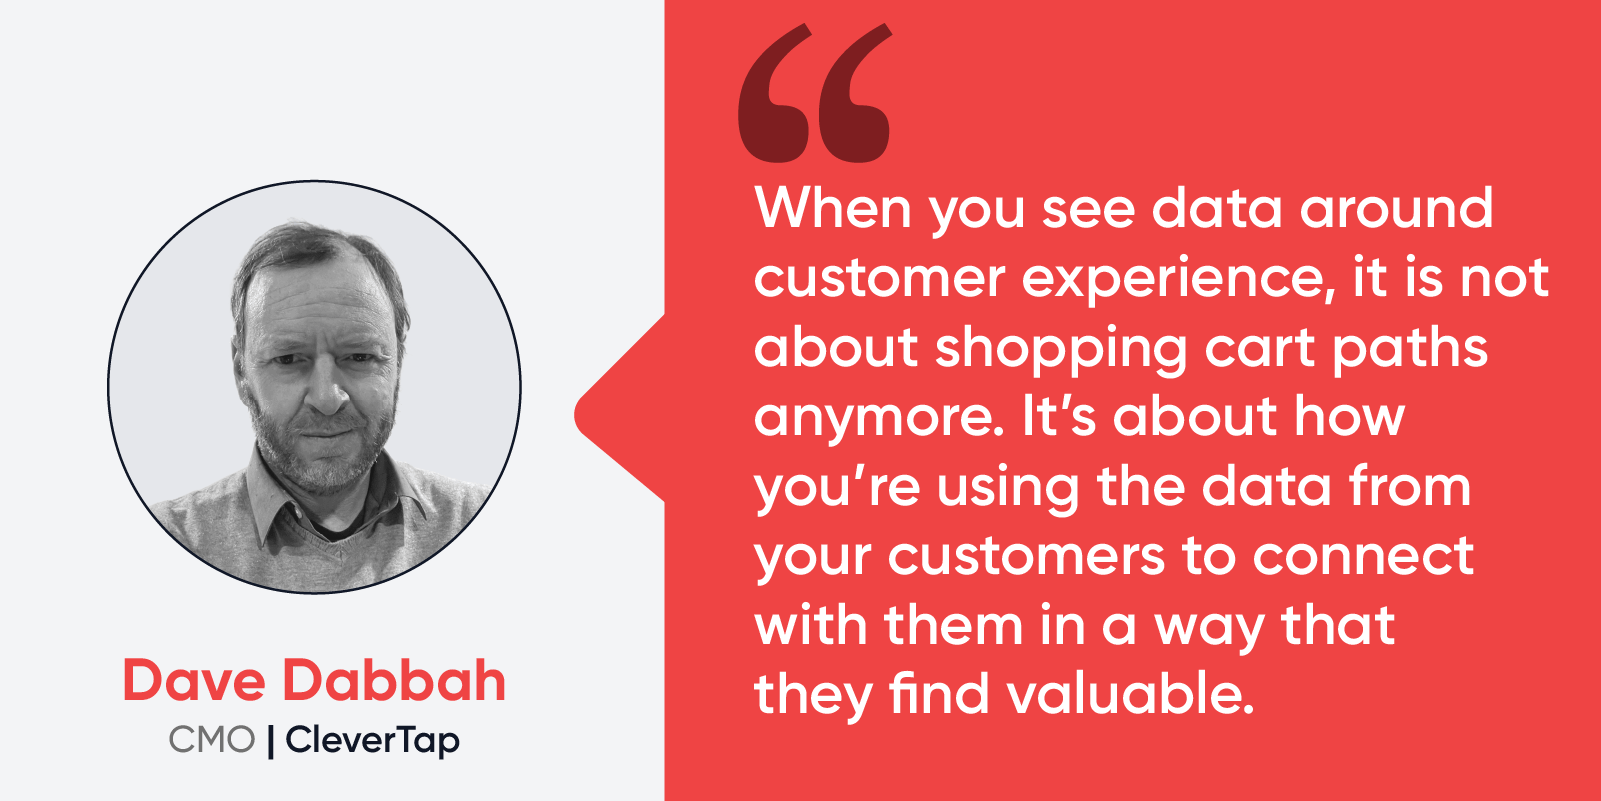 Quote by Dave Dabbah, CMO at CleverTap: “When you see data around customer experience, it is not about shopping cart paths anymore. It’s about how you’re using the data from your customers to connect with them in a way that they find valuable.” 